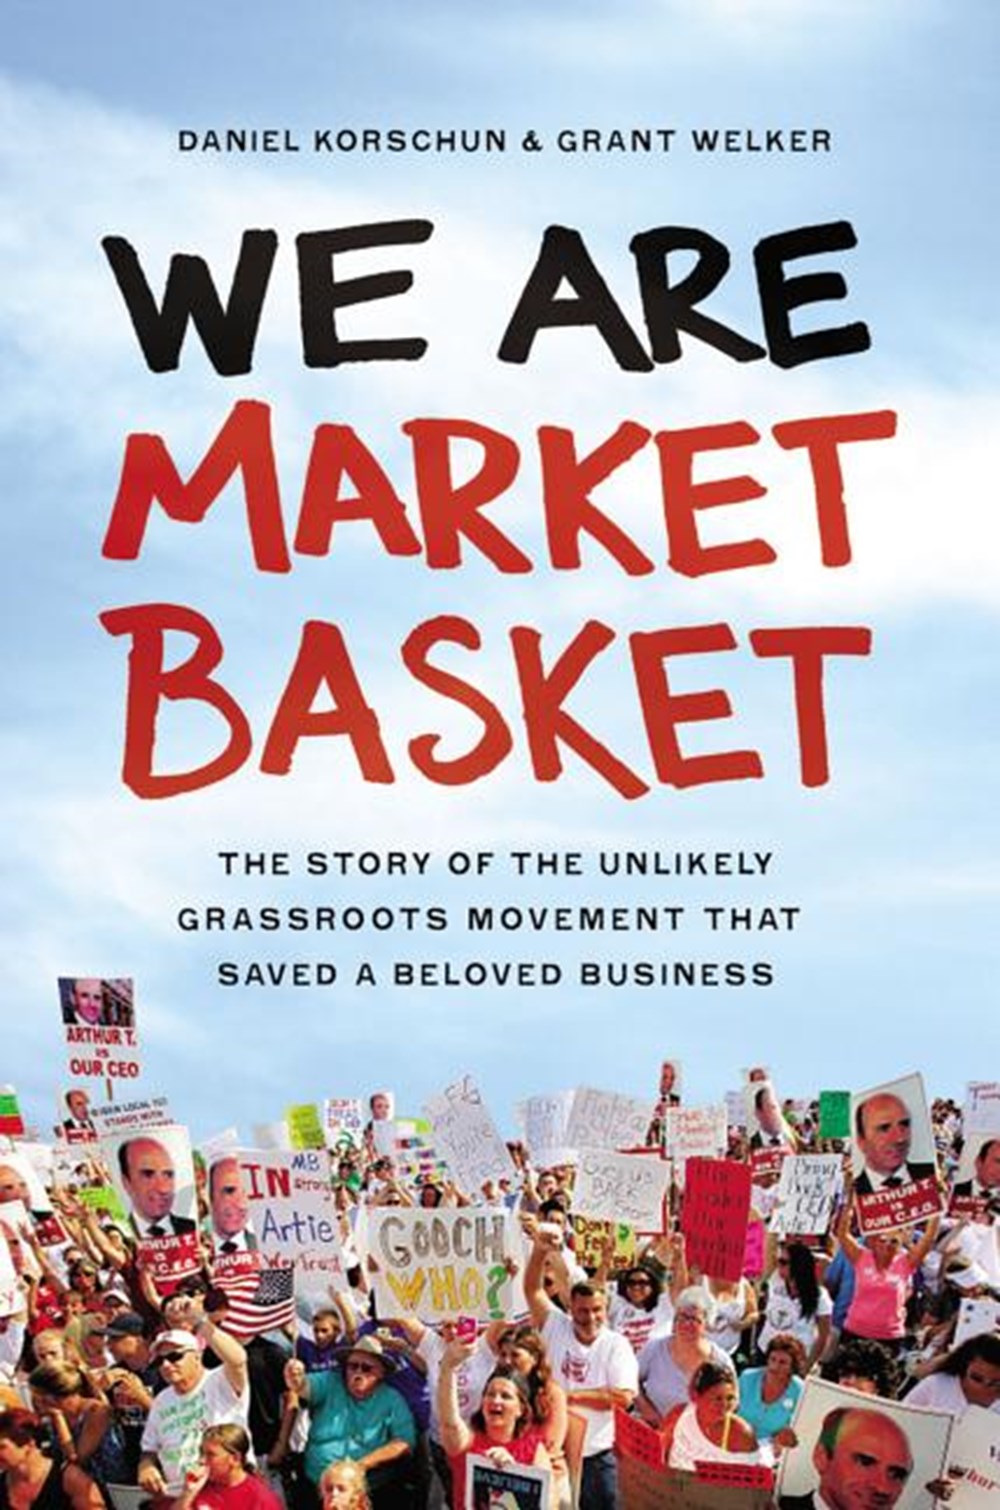 We Are Market Basket The Story of the Unlikely Grassroots Movement That Saved a Beloved Business